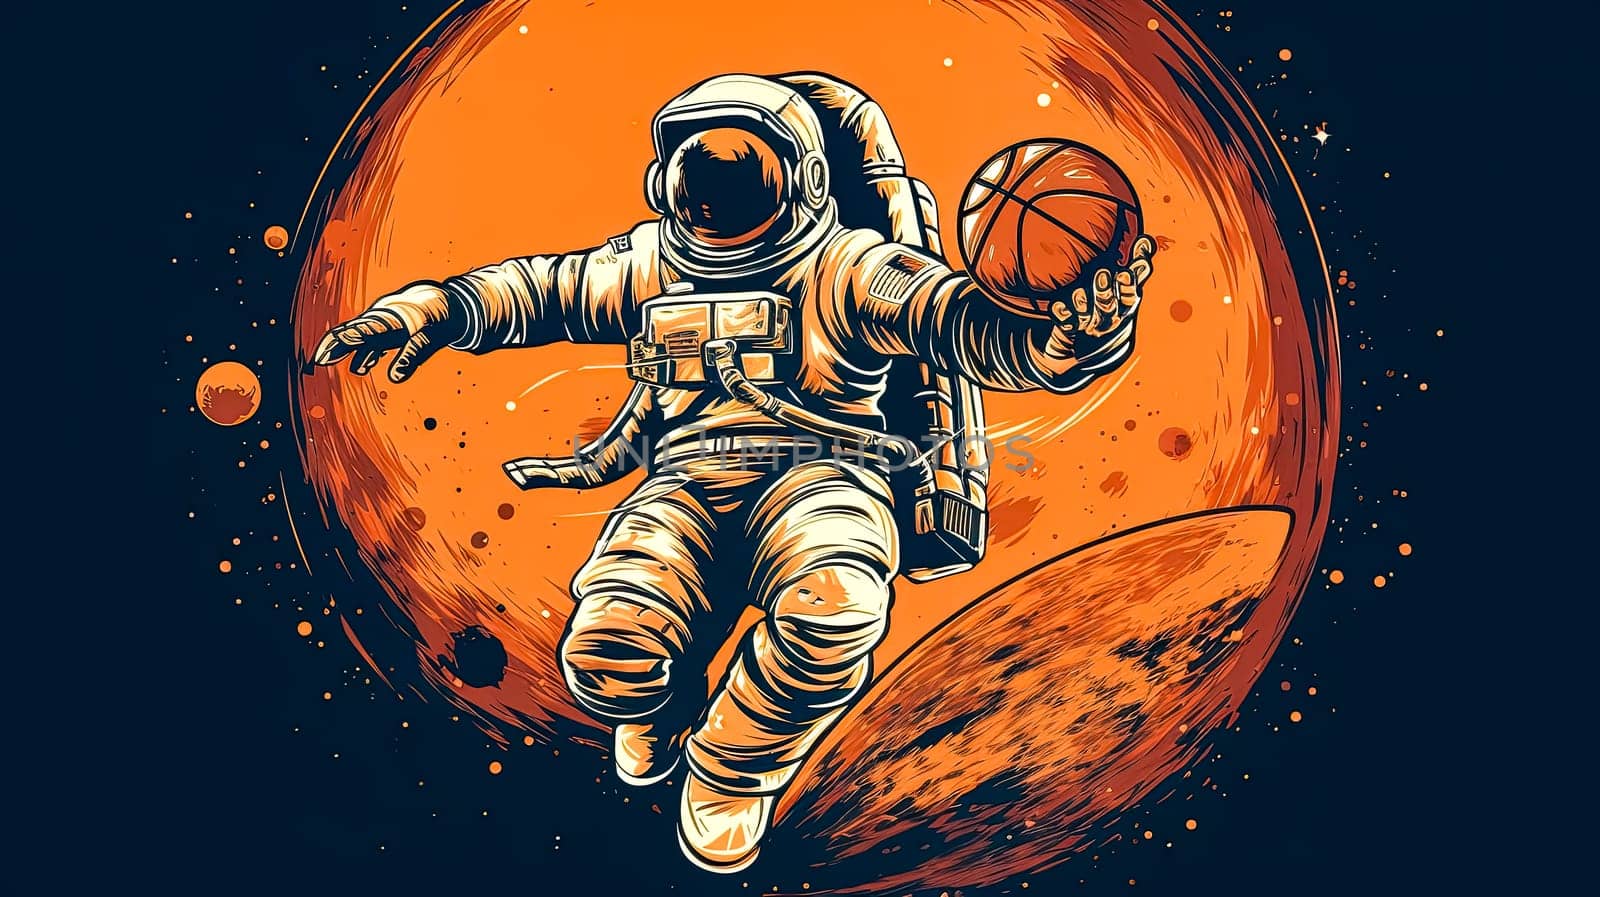 On the alien courts of Mars, an astronaut gracefully maneuvers a basketball, merging the beauty of space exploration with the elegance of the game